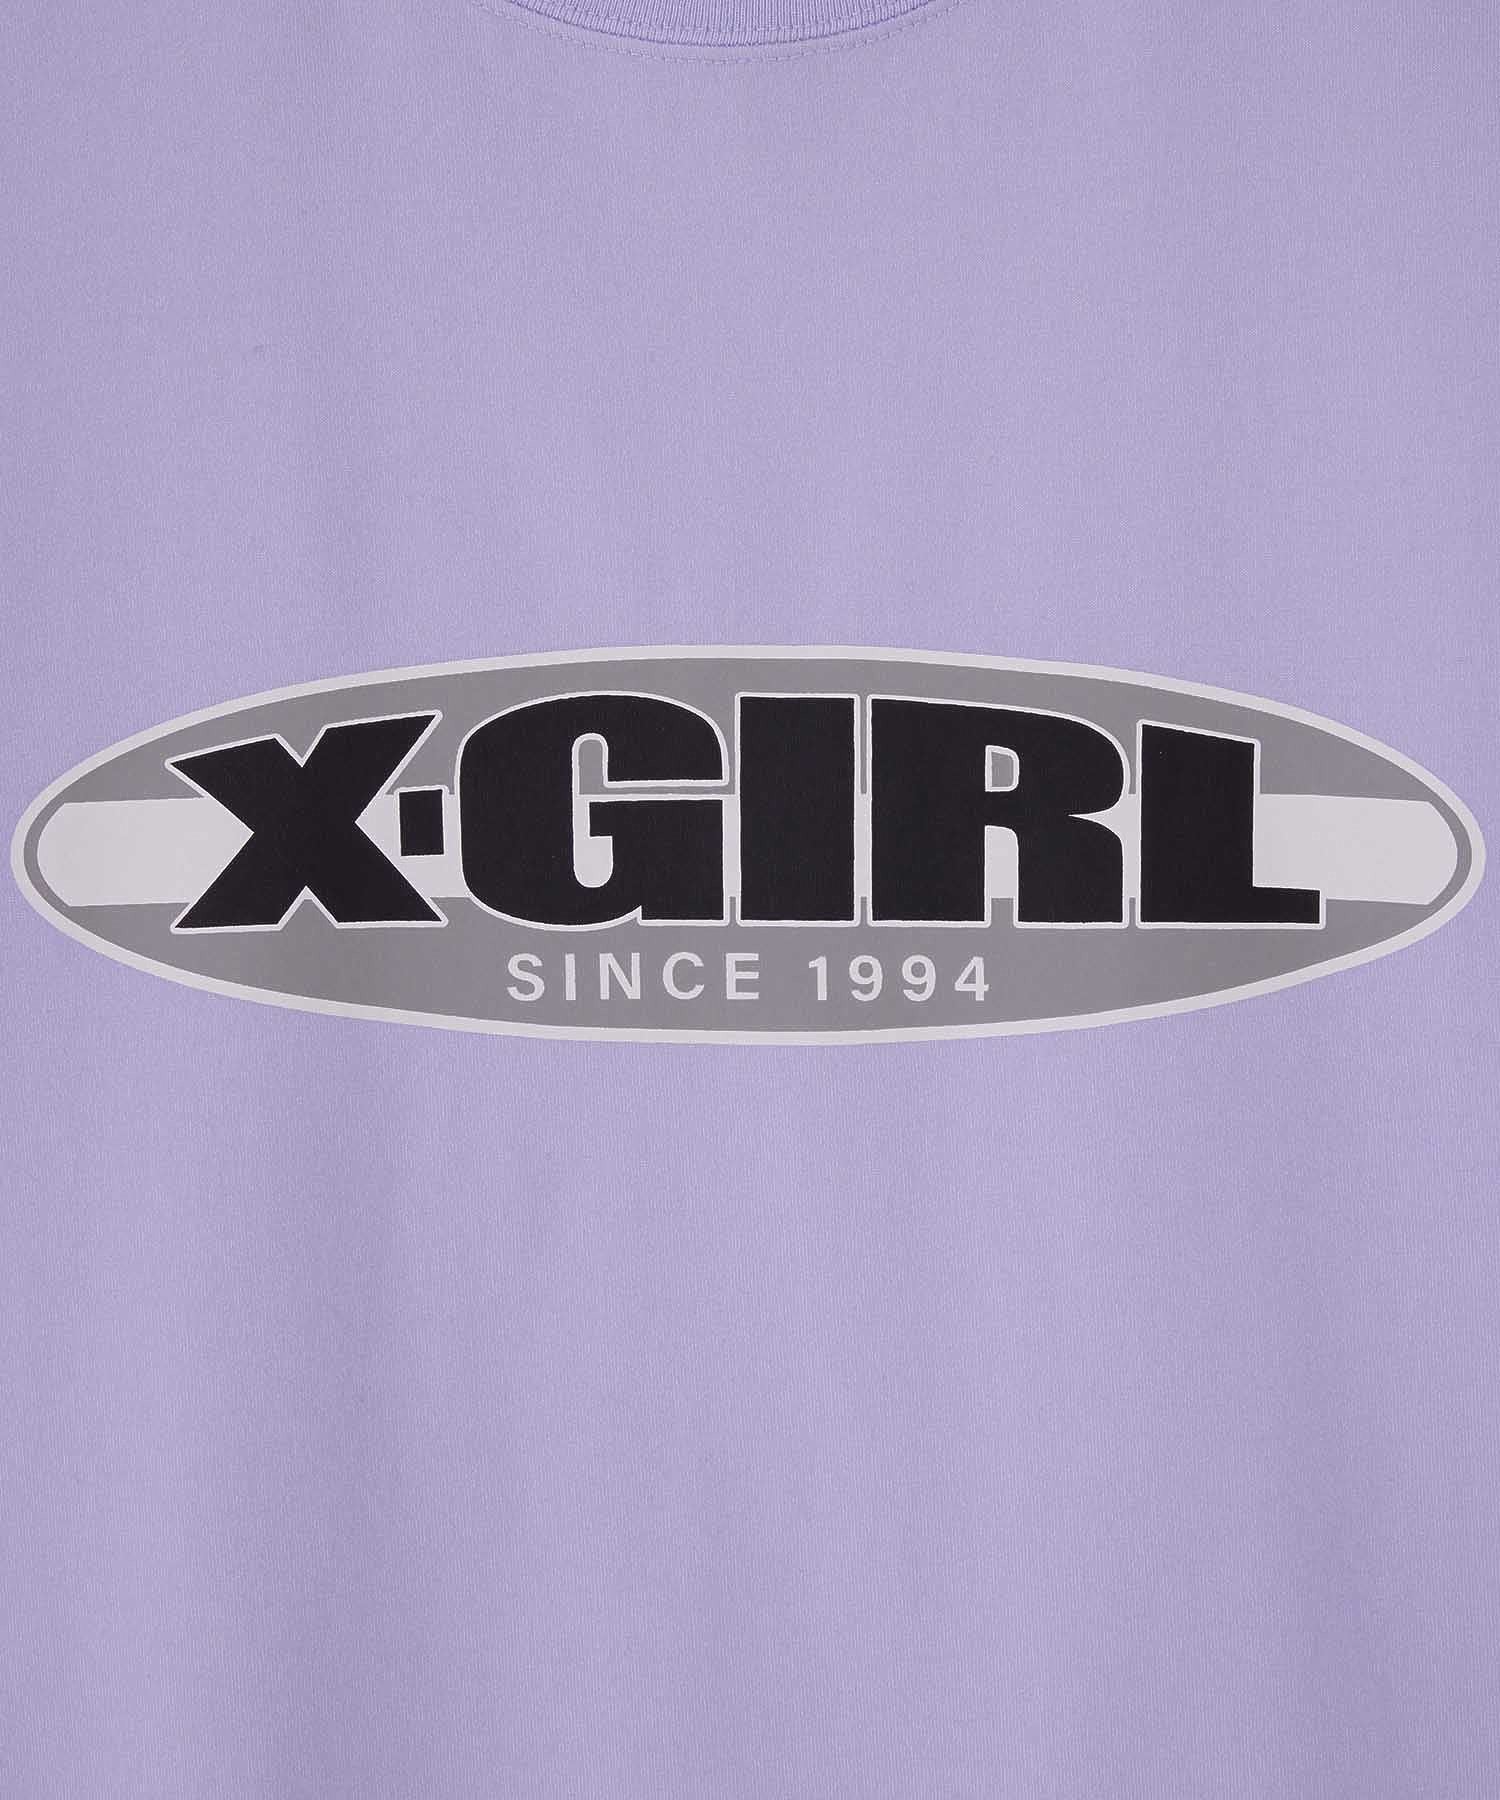 COLOR CONTRAST OVAL LOGO S/S TEE X-girl